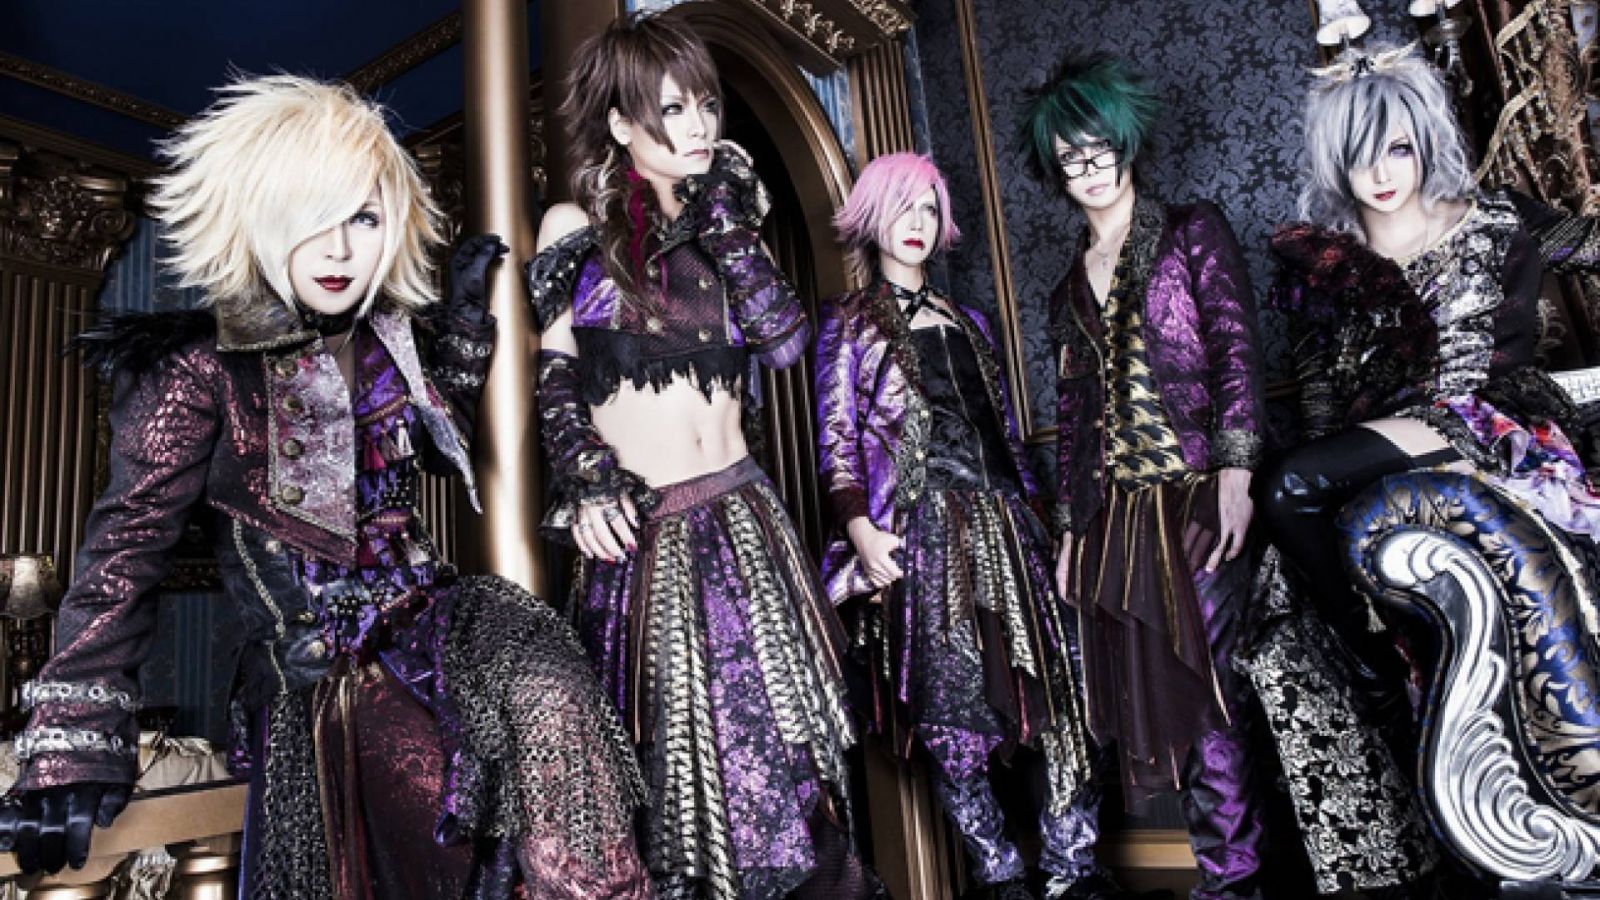 Avanchick to Disband © ROCKSTAR RECORDS. All rights reserved.